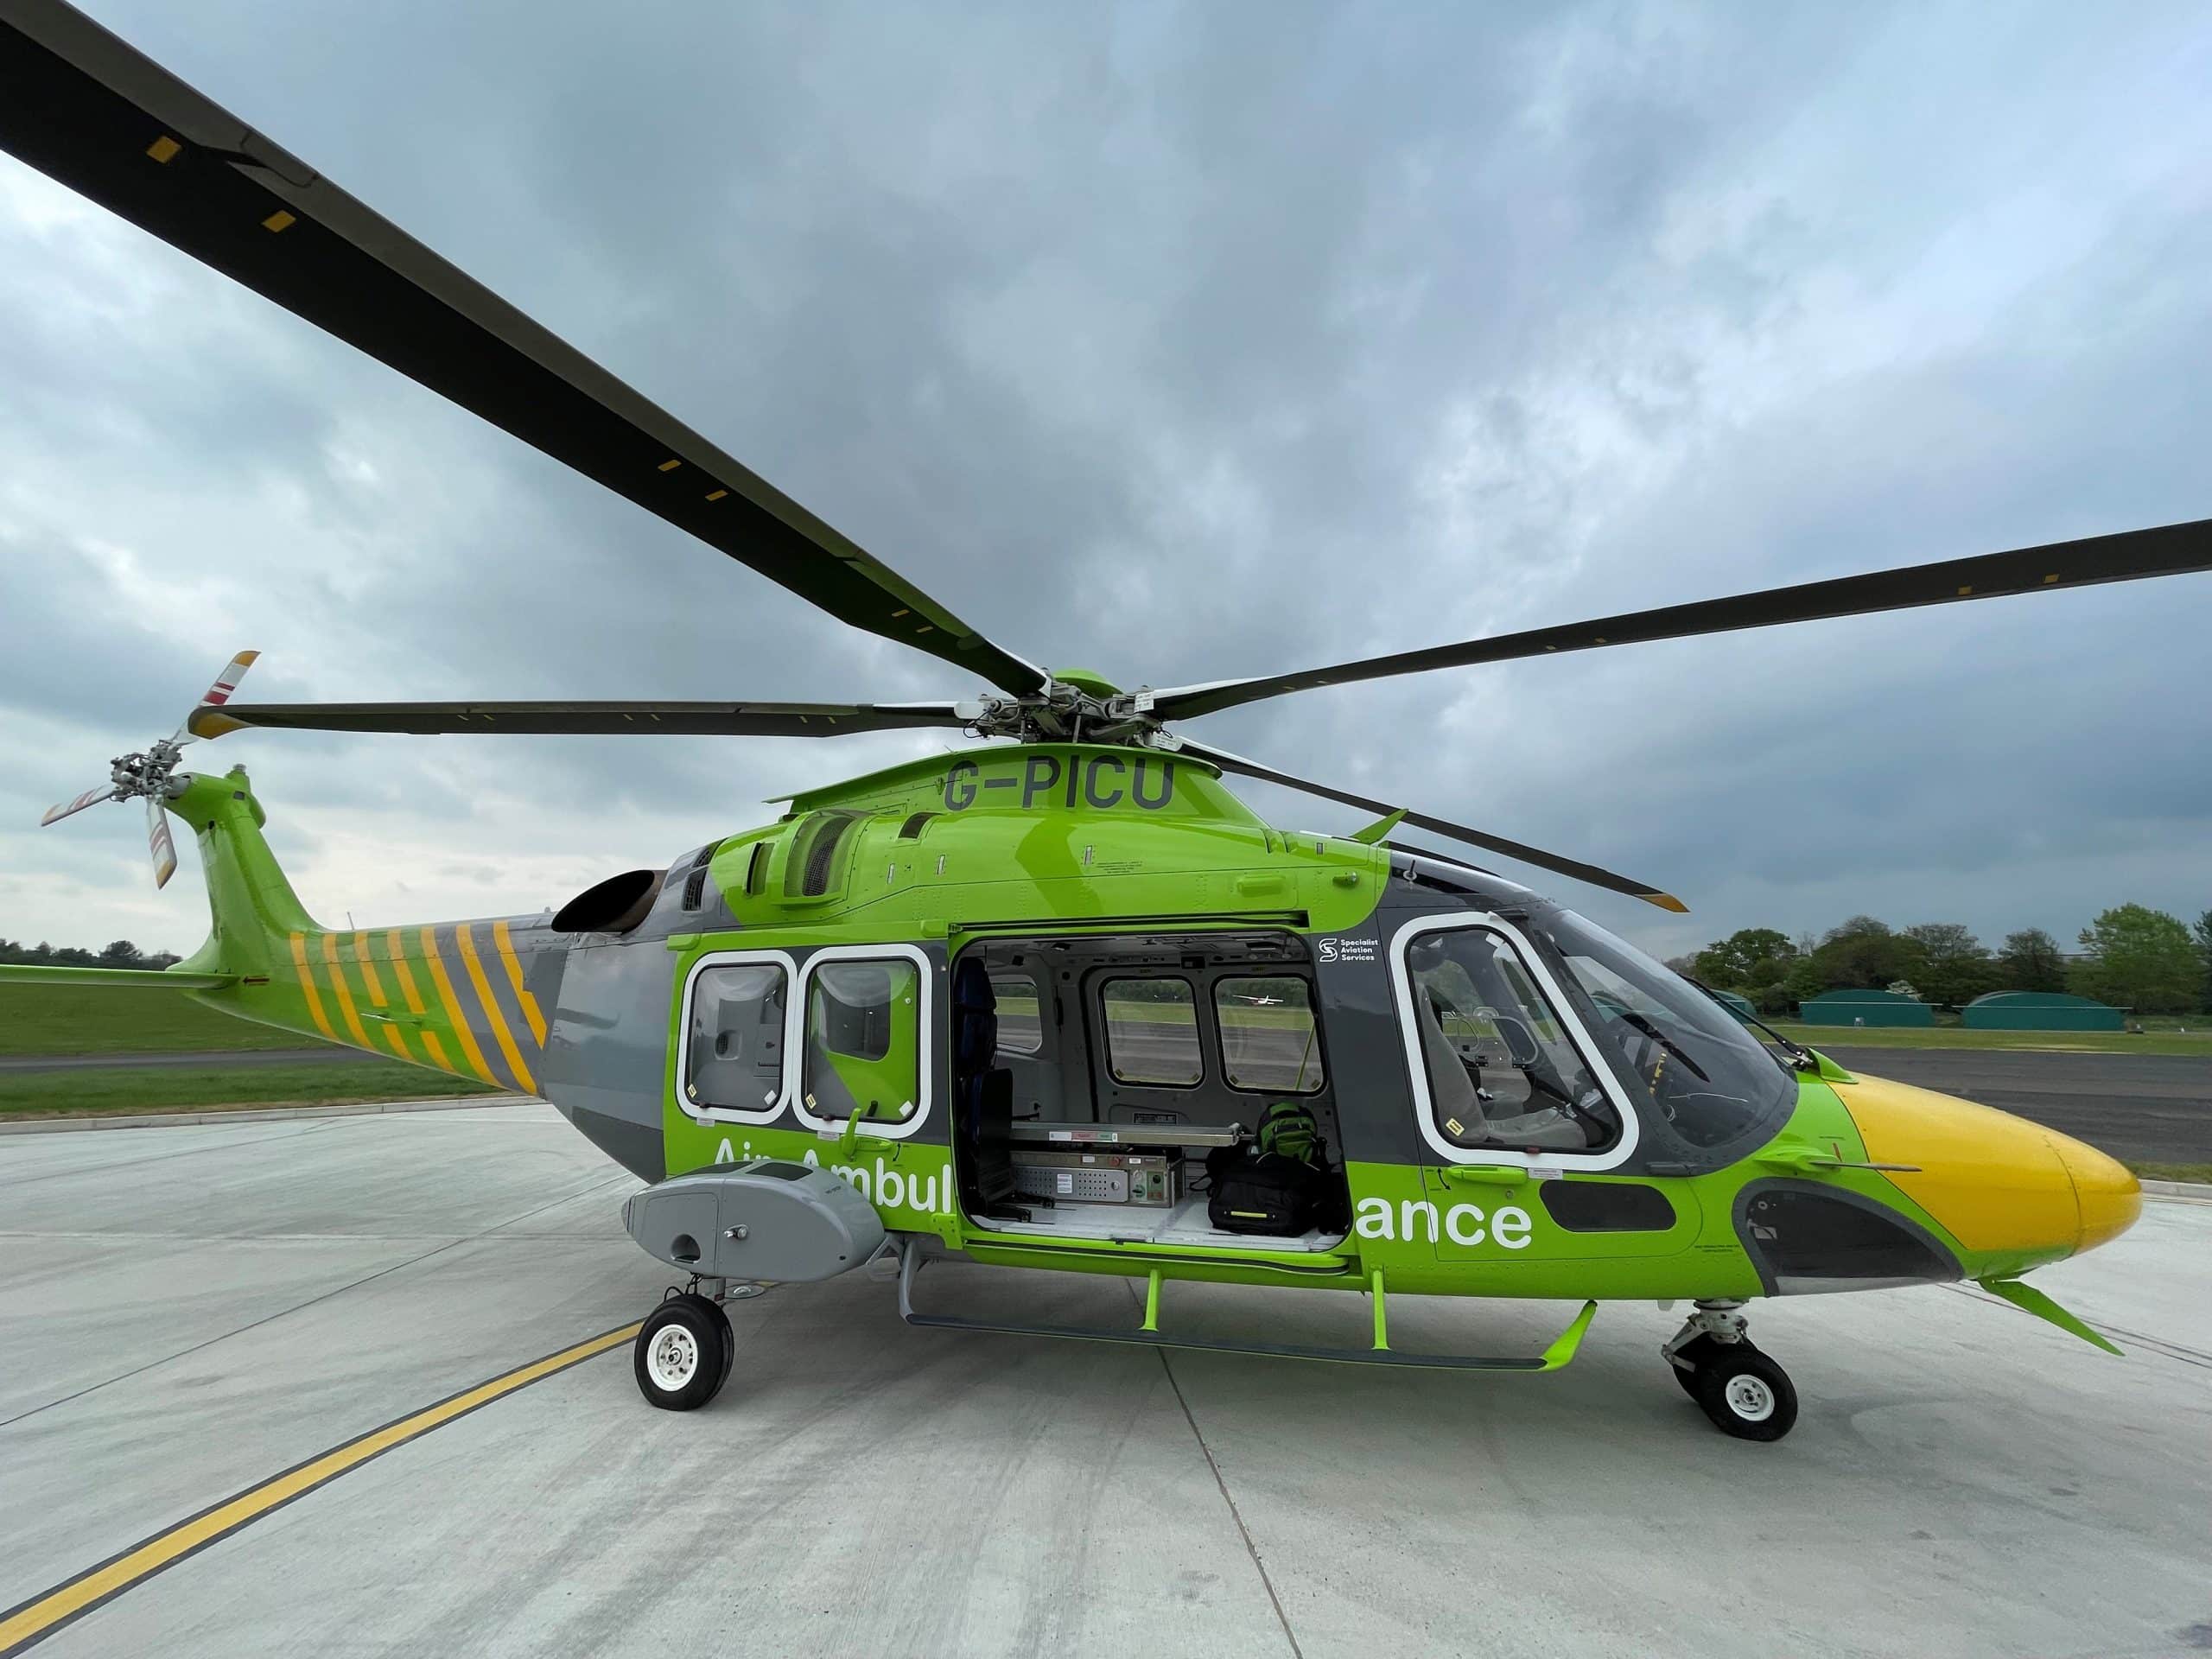 Essex & Herts Air Ambulance replacement ‘green and yellow’ helicopter to take to the skies in June and July